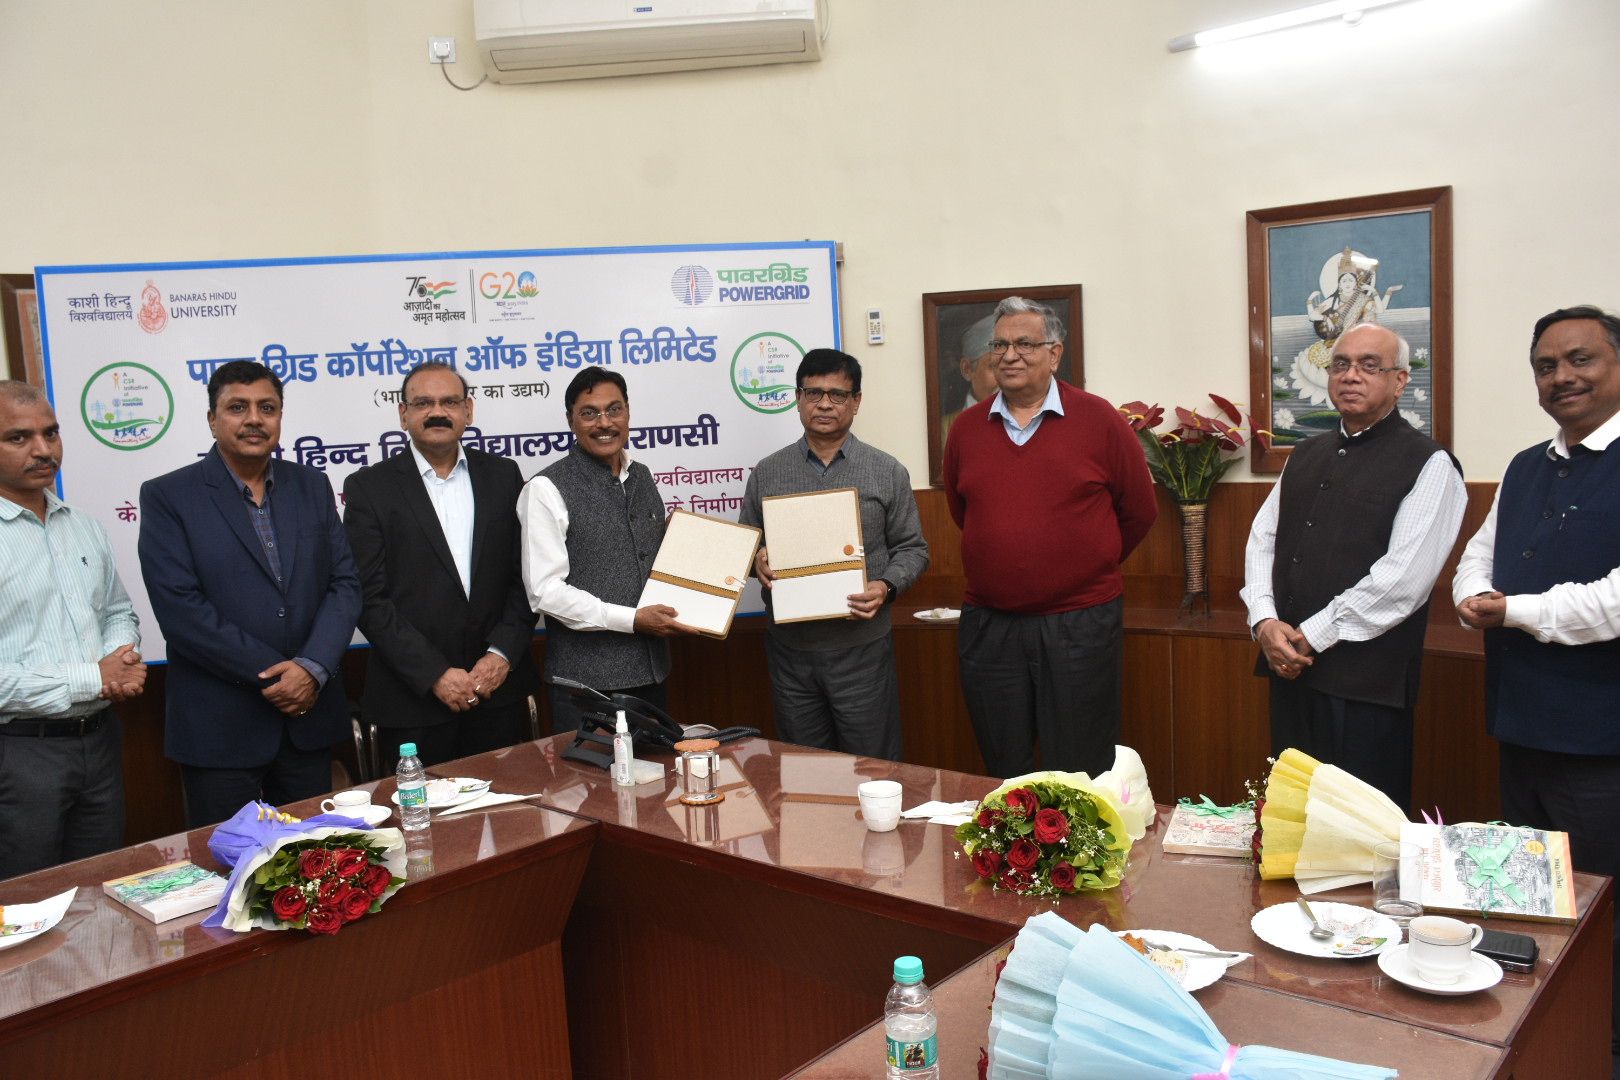 Banaras Hindu University Joins Forces with Power Grid Corporation for Noteworthy CSR Initiative